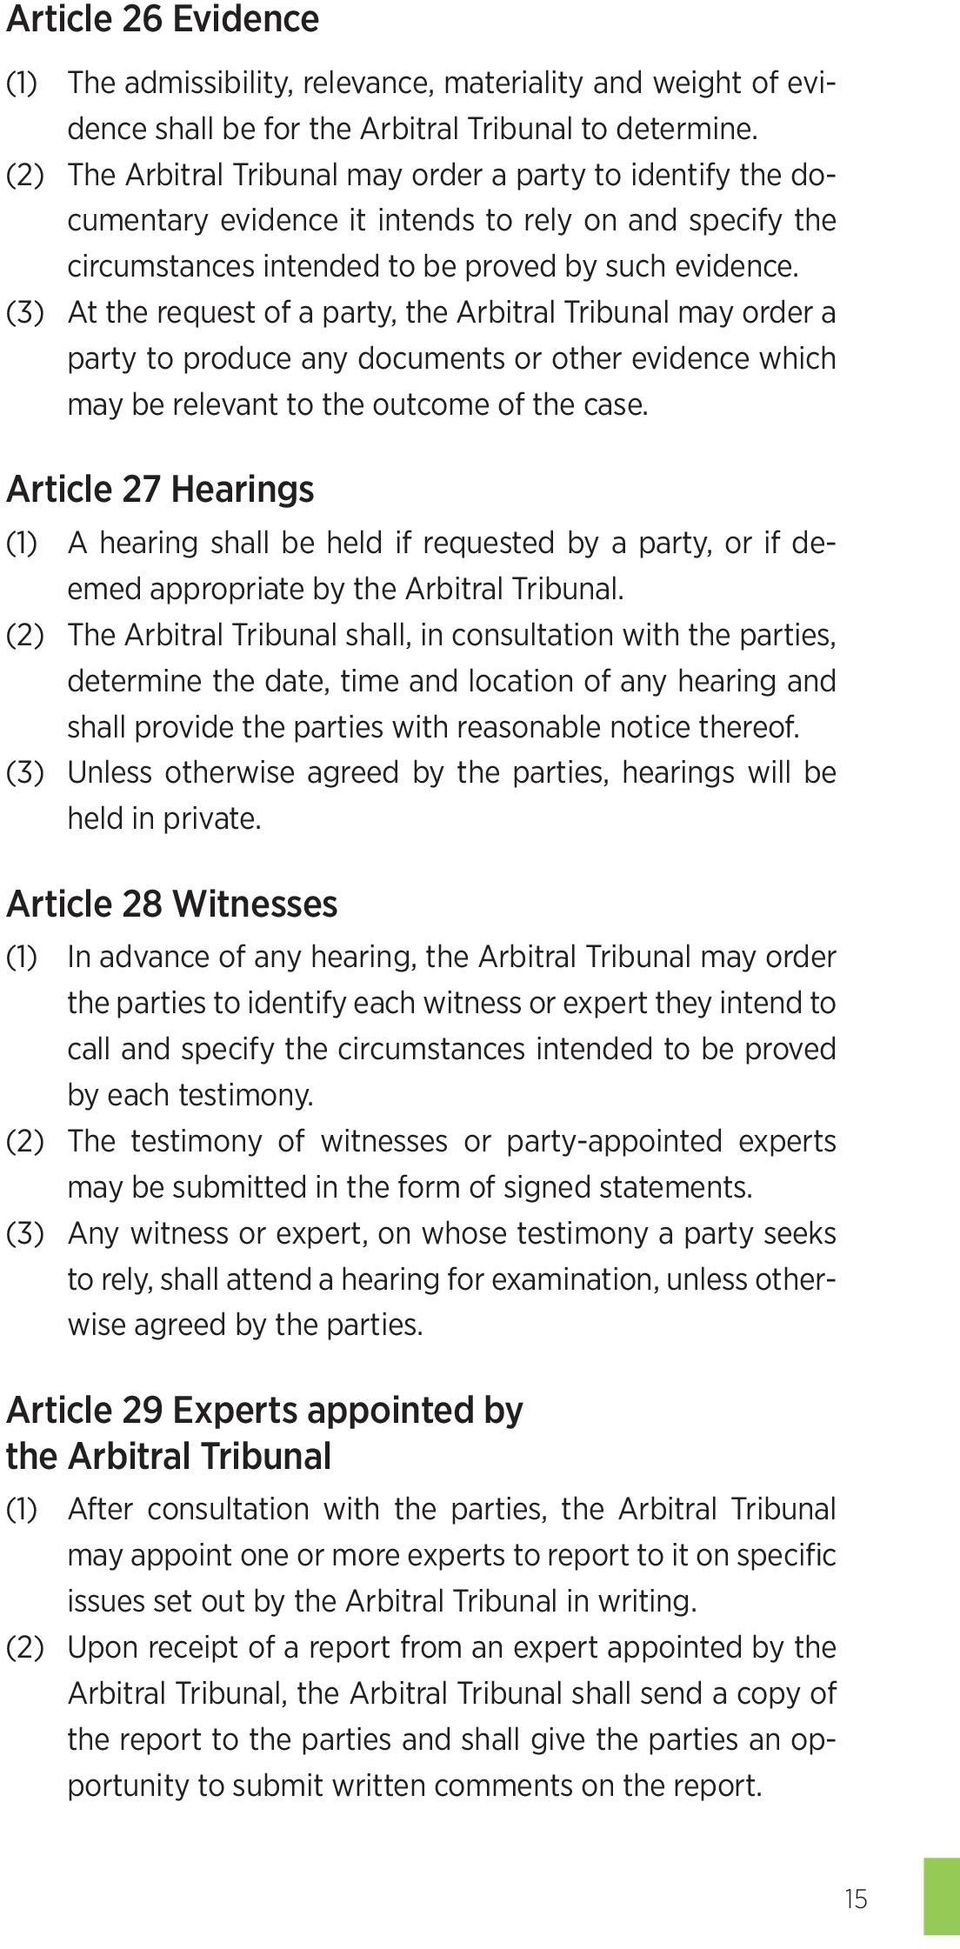 (3) At the request of a party, the Arbitral Tribunal may order a party to produce any documents or other evidence which may be relevant to the outcome of the case.